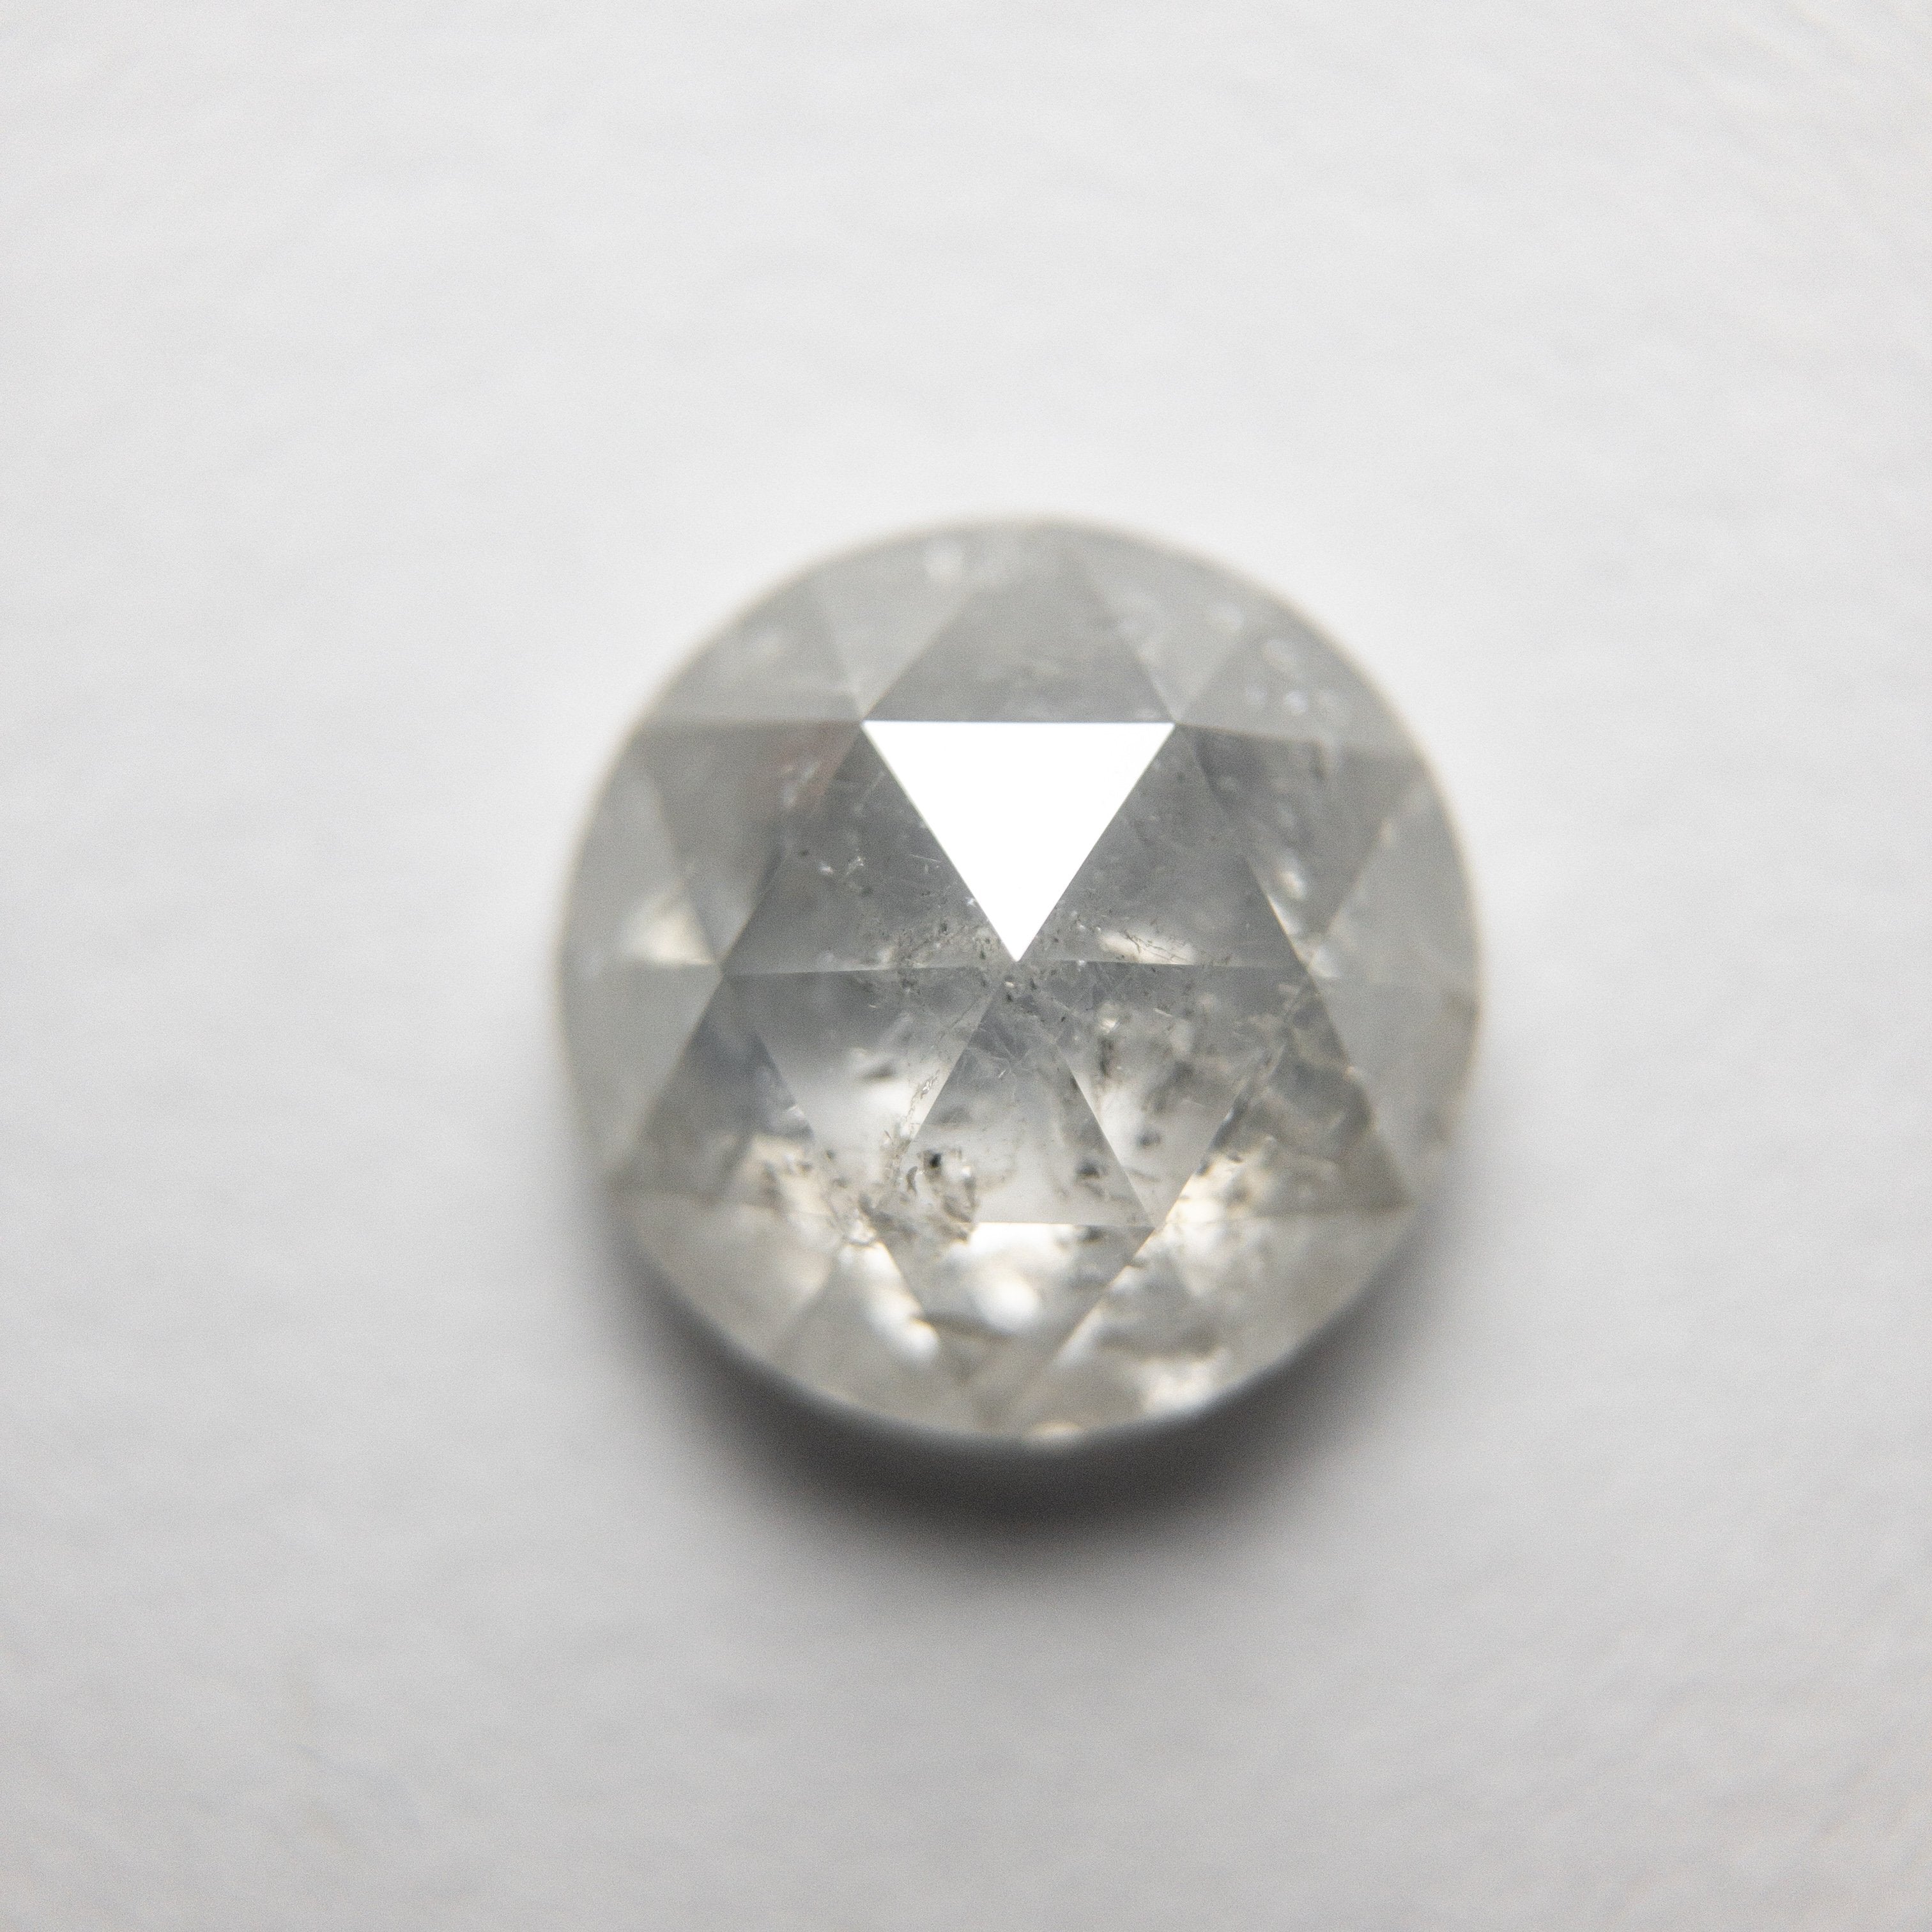 1.99ct 8.03x8.01x3.77mm Round Rosecut 18351-11 HOLD D1874 2.2.21